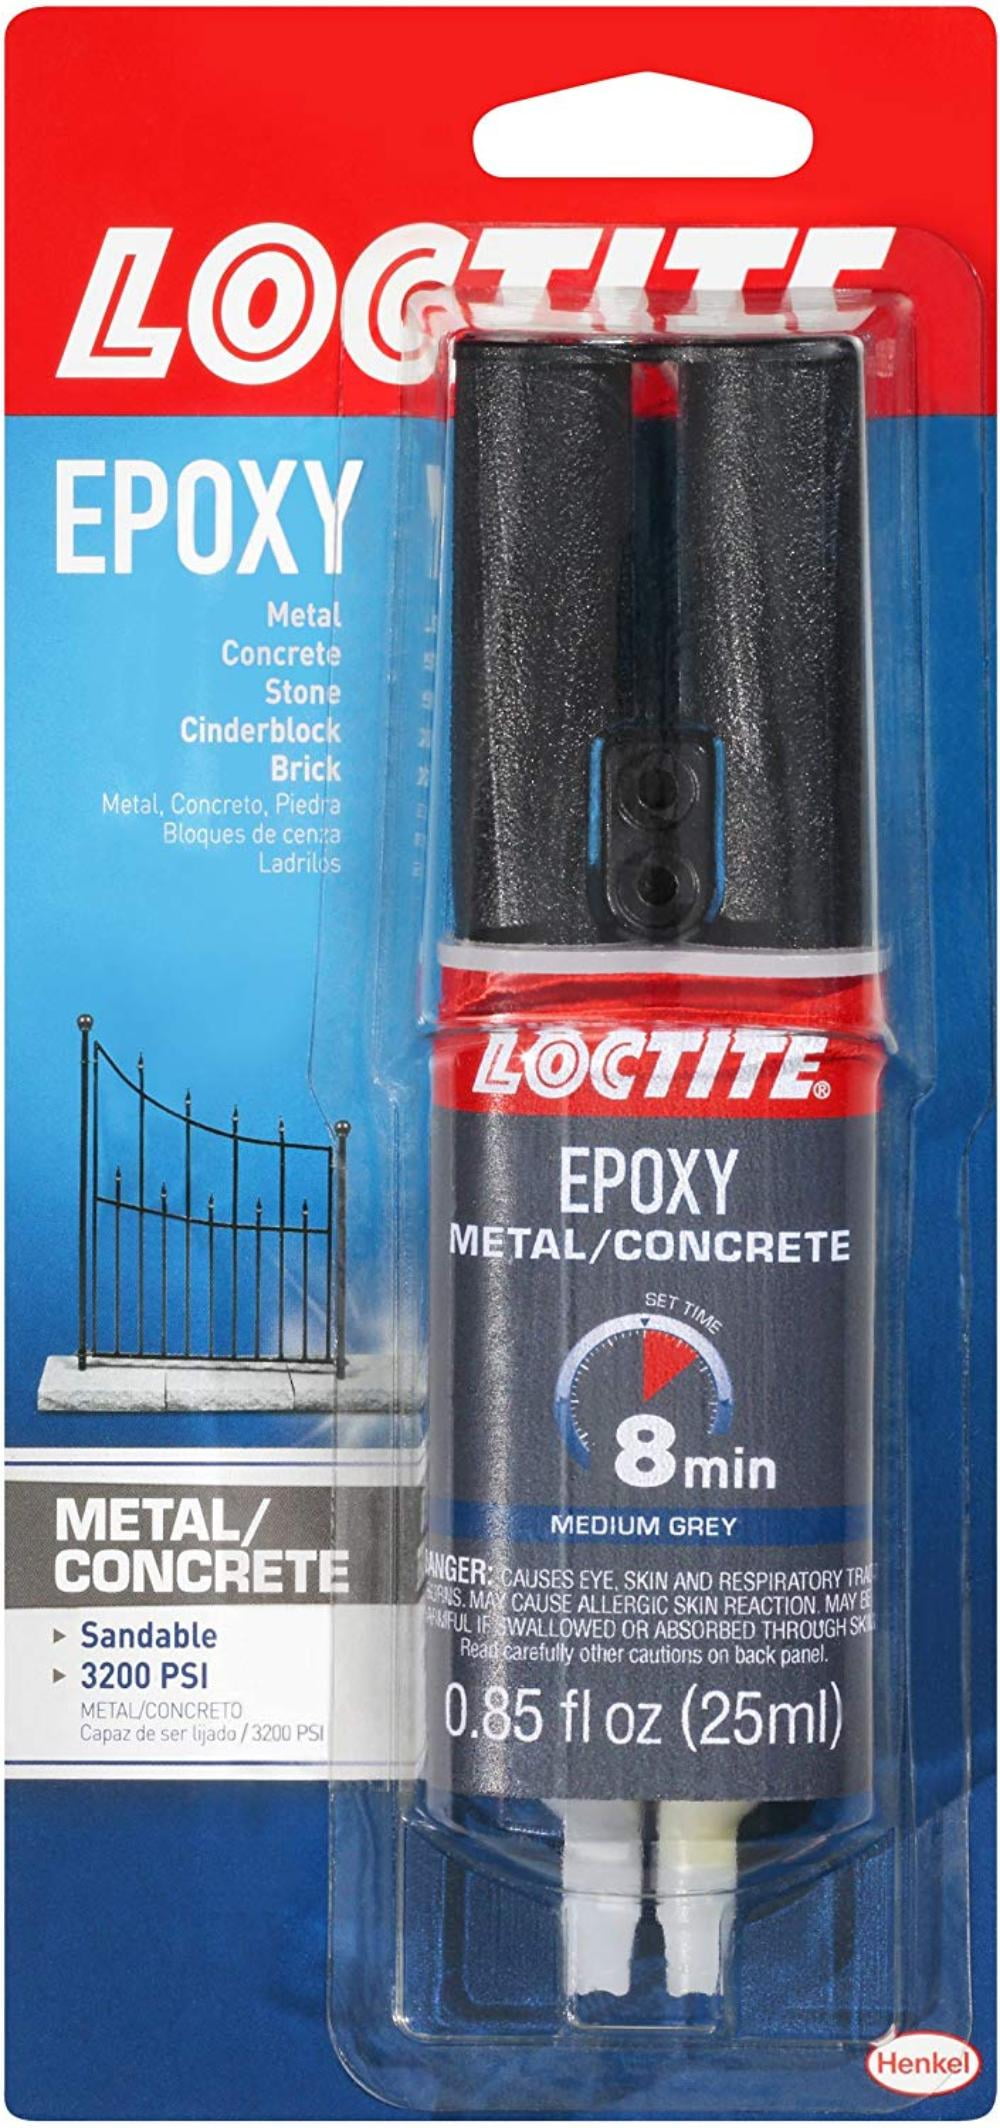 Loctite Go2 Clear Repair Wrap 1-Inch by 7.5-Foot Roll 1872161 